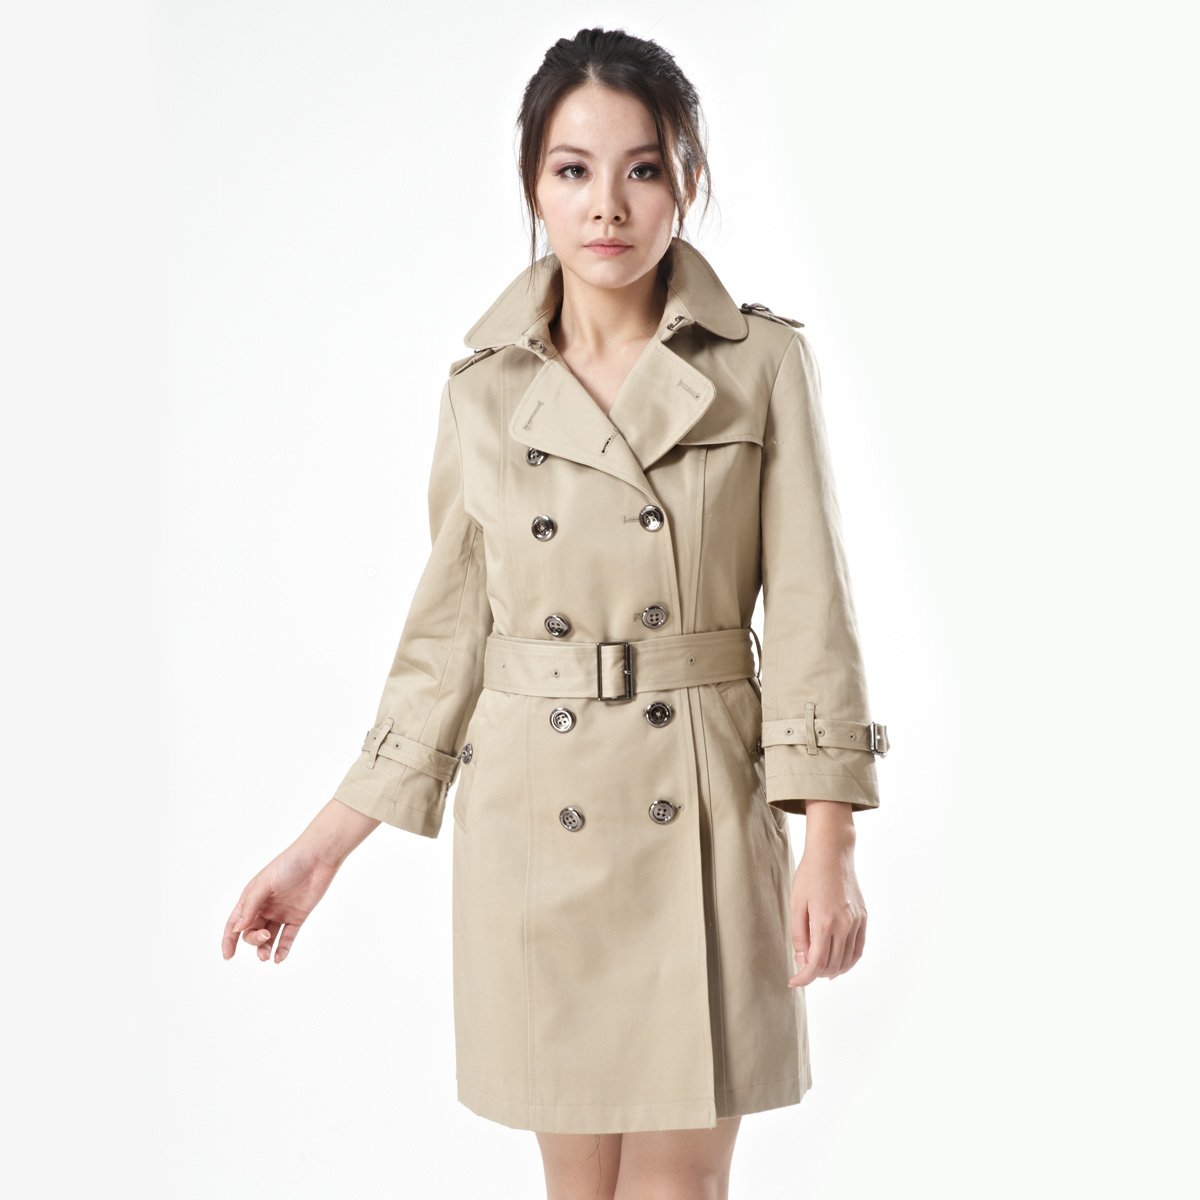 ladies trench coat creative white trench coat dress aline and shift dress pinterest mcndsir